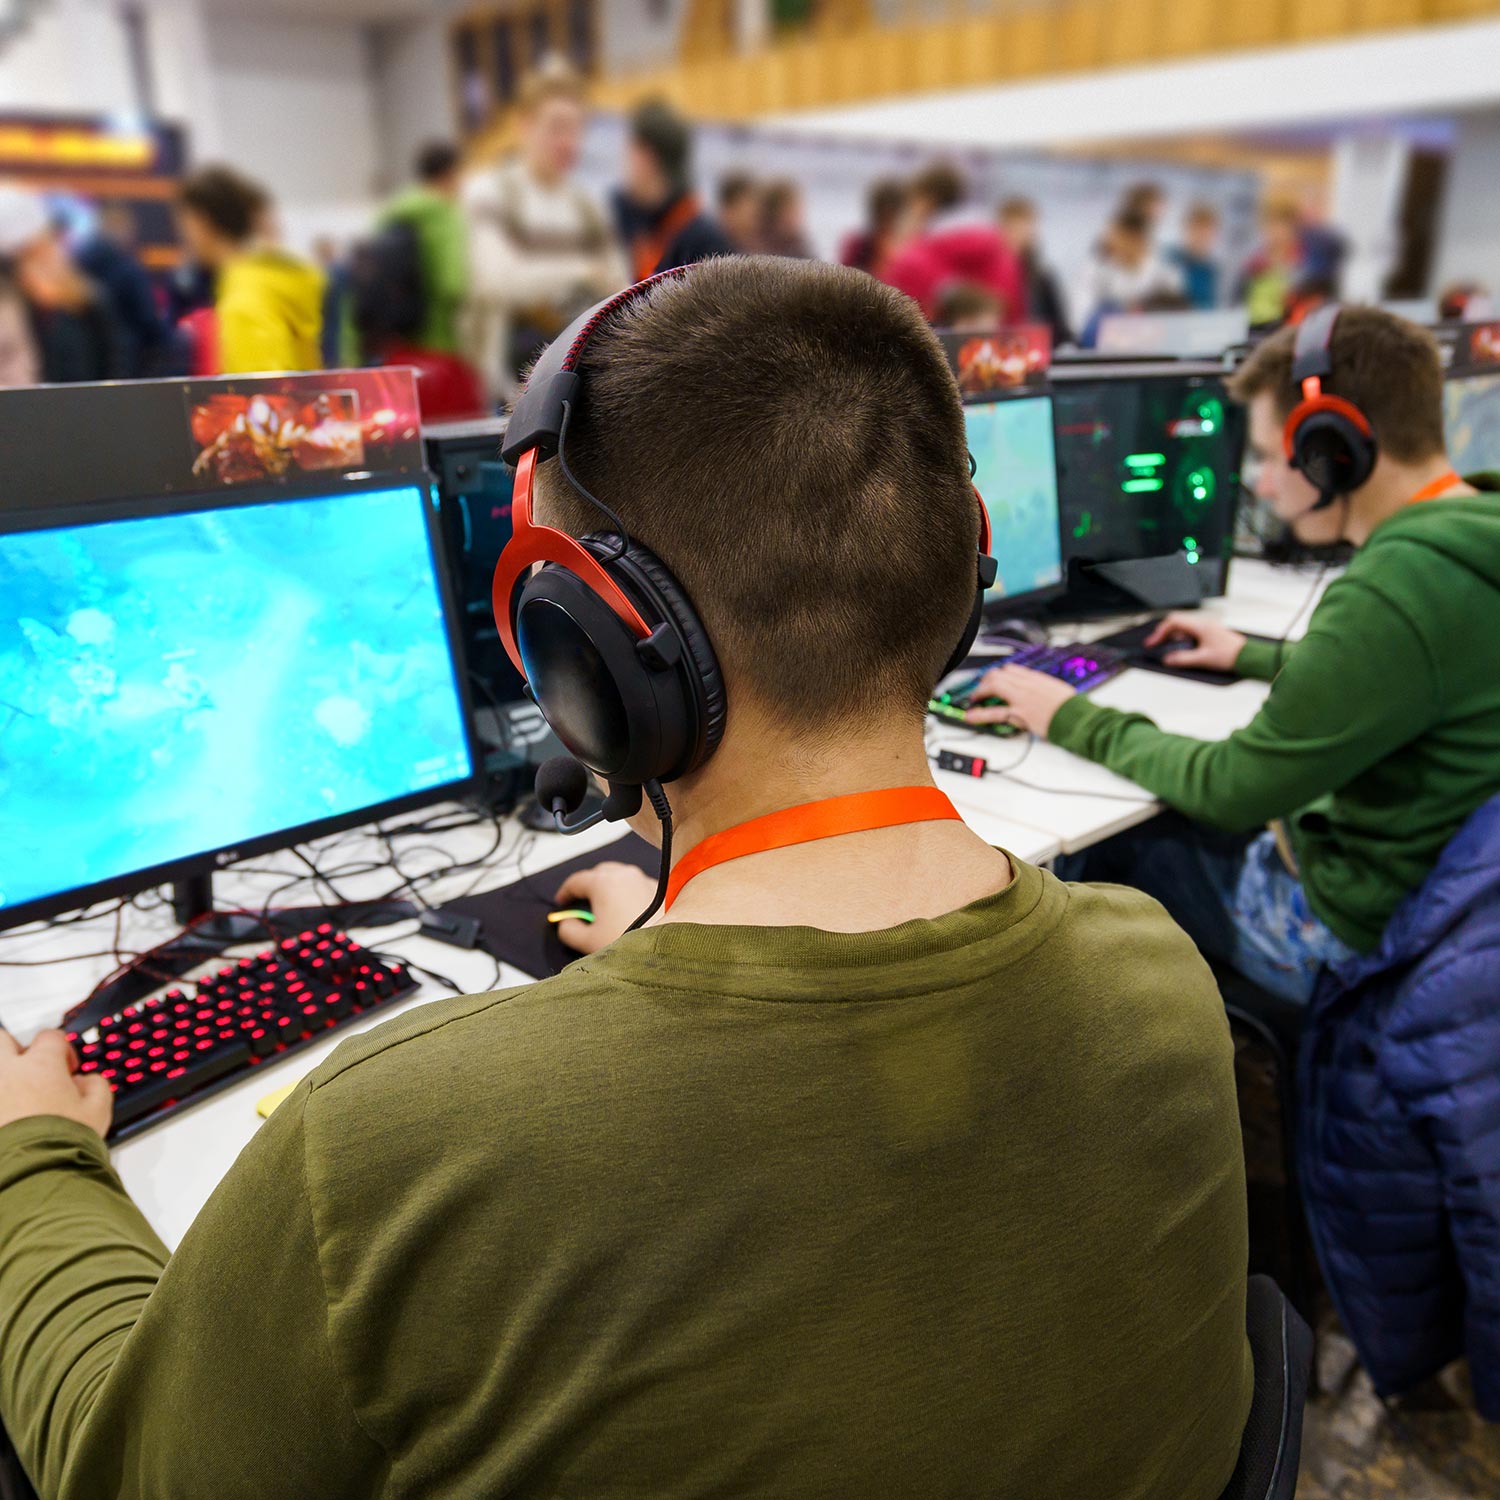 Students participating in an Esports competition.